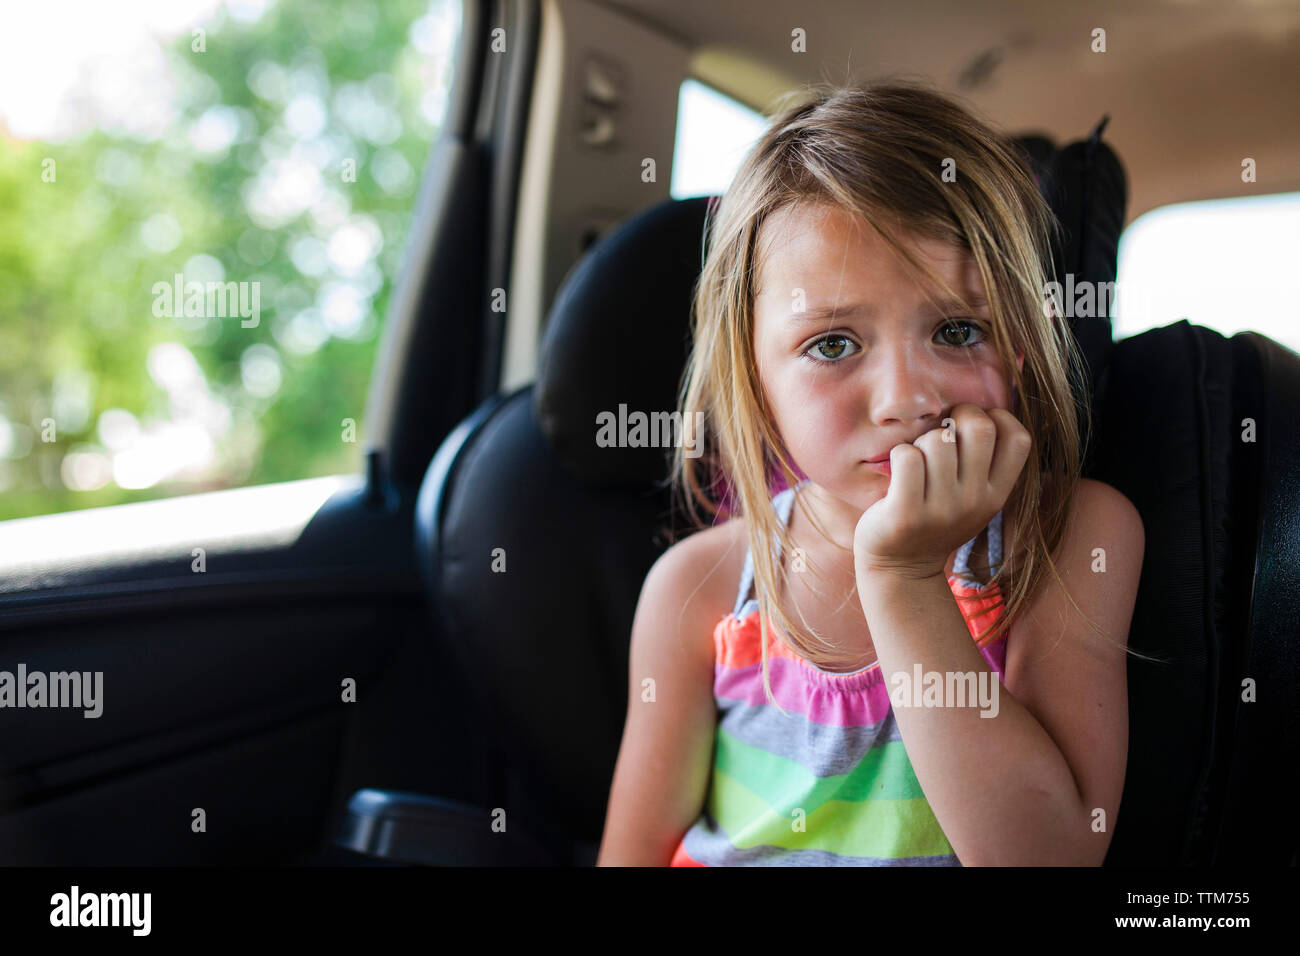 Portrait of upset girl with fingers in mouth Stock Photo